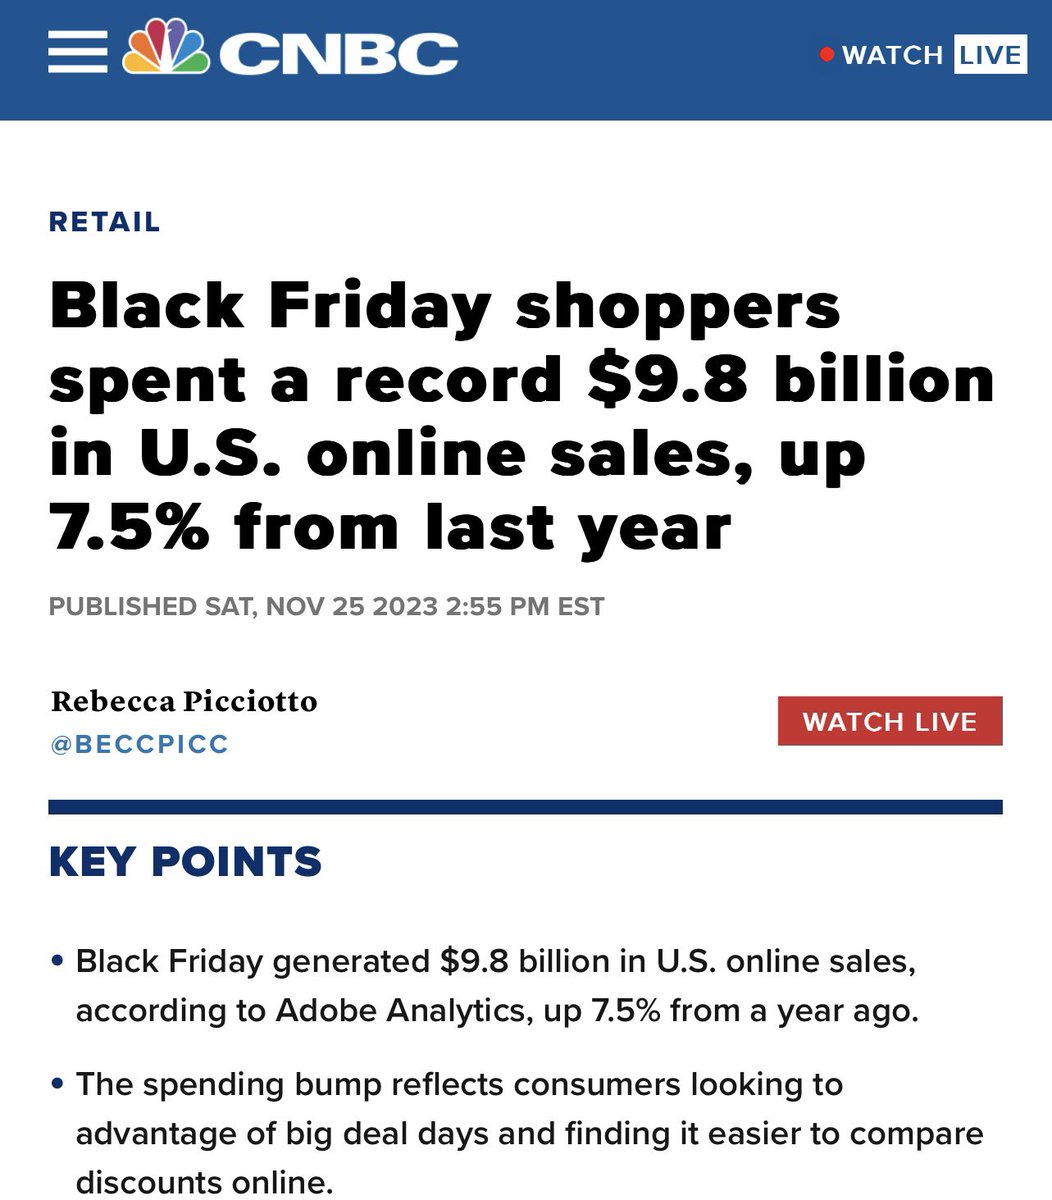 SOCIAL MEDIA IS LYING TO YOU ABOUT BLACK FRIDAY!!👇🏾👇🏾 A lot of people are shocked by some of the headlines stating “Black Friday shoppers spent a record $9.8 billion in U.S. online sales, up 7.5% from last year” But this is a perfect example of how the media can be misleading…